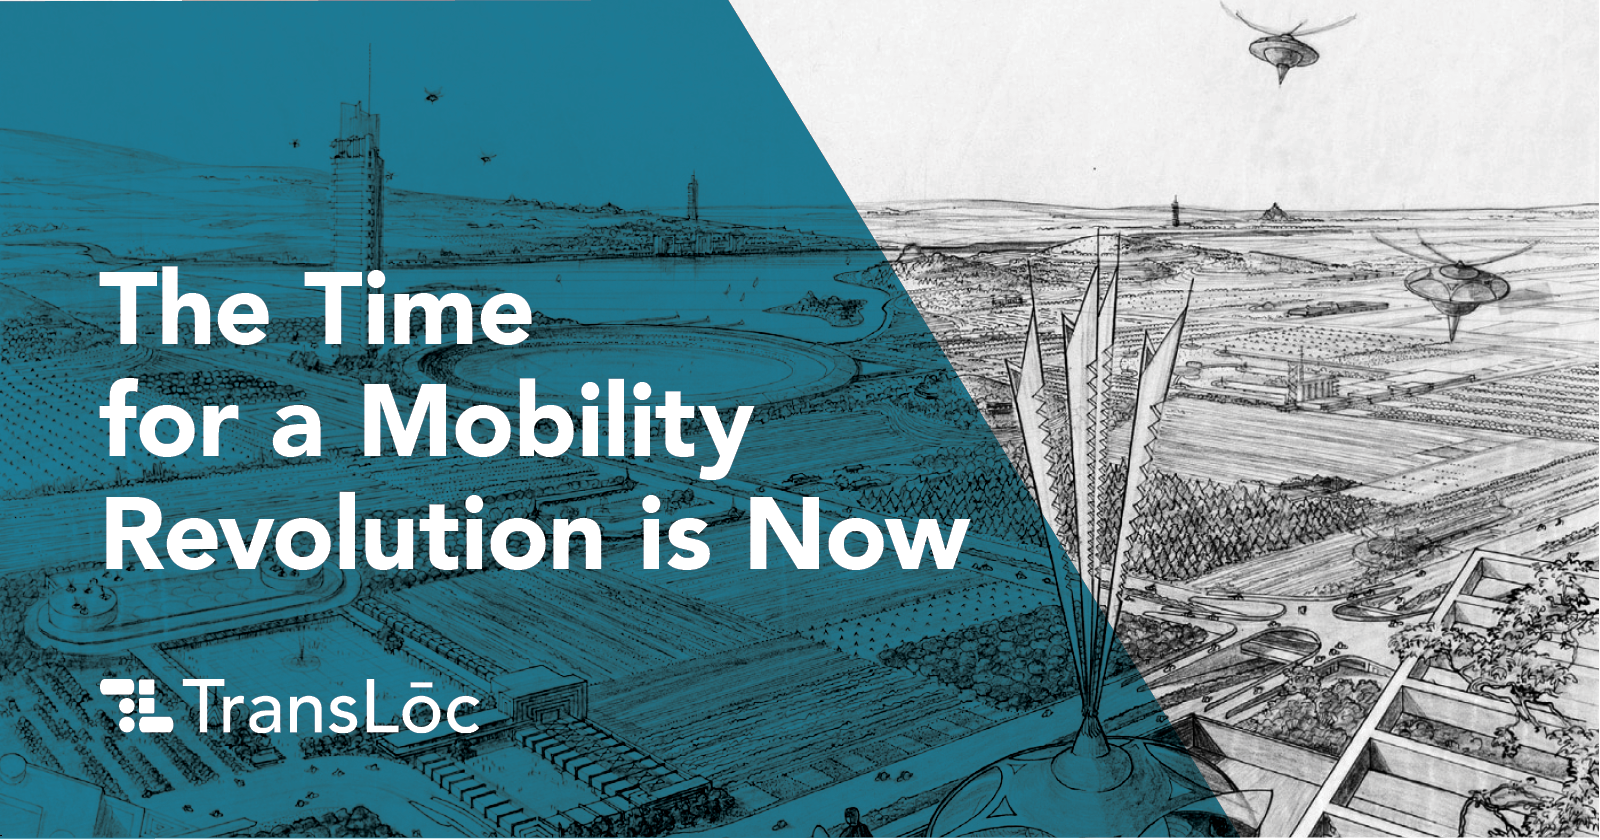 The Time for a Mobility Revolution is Now